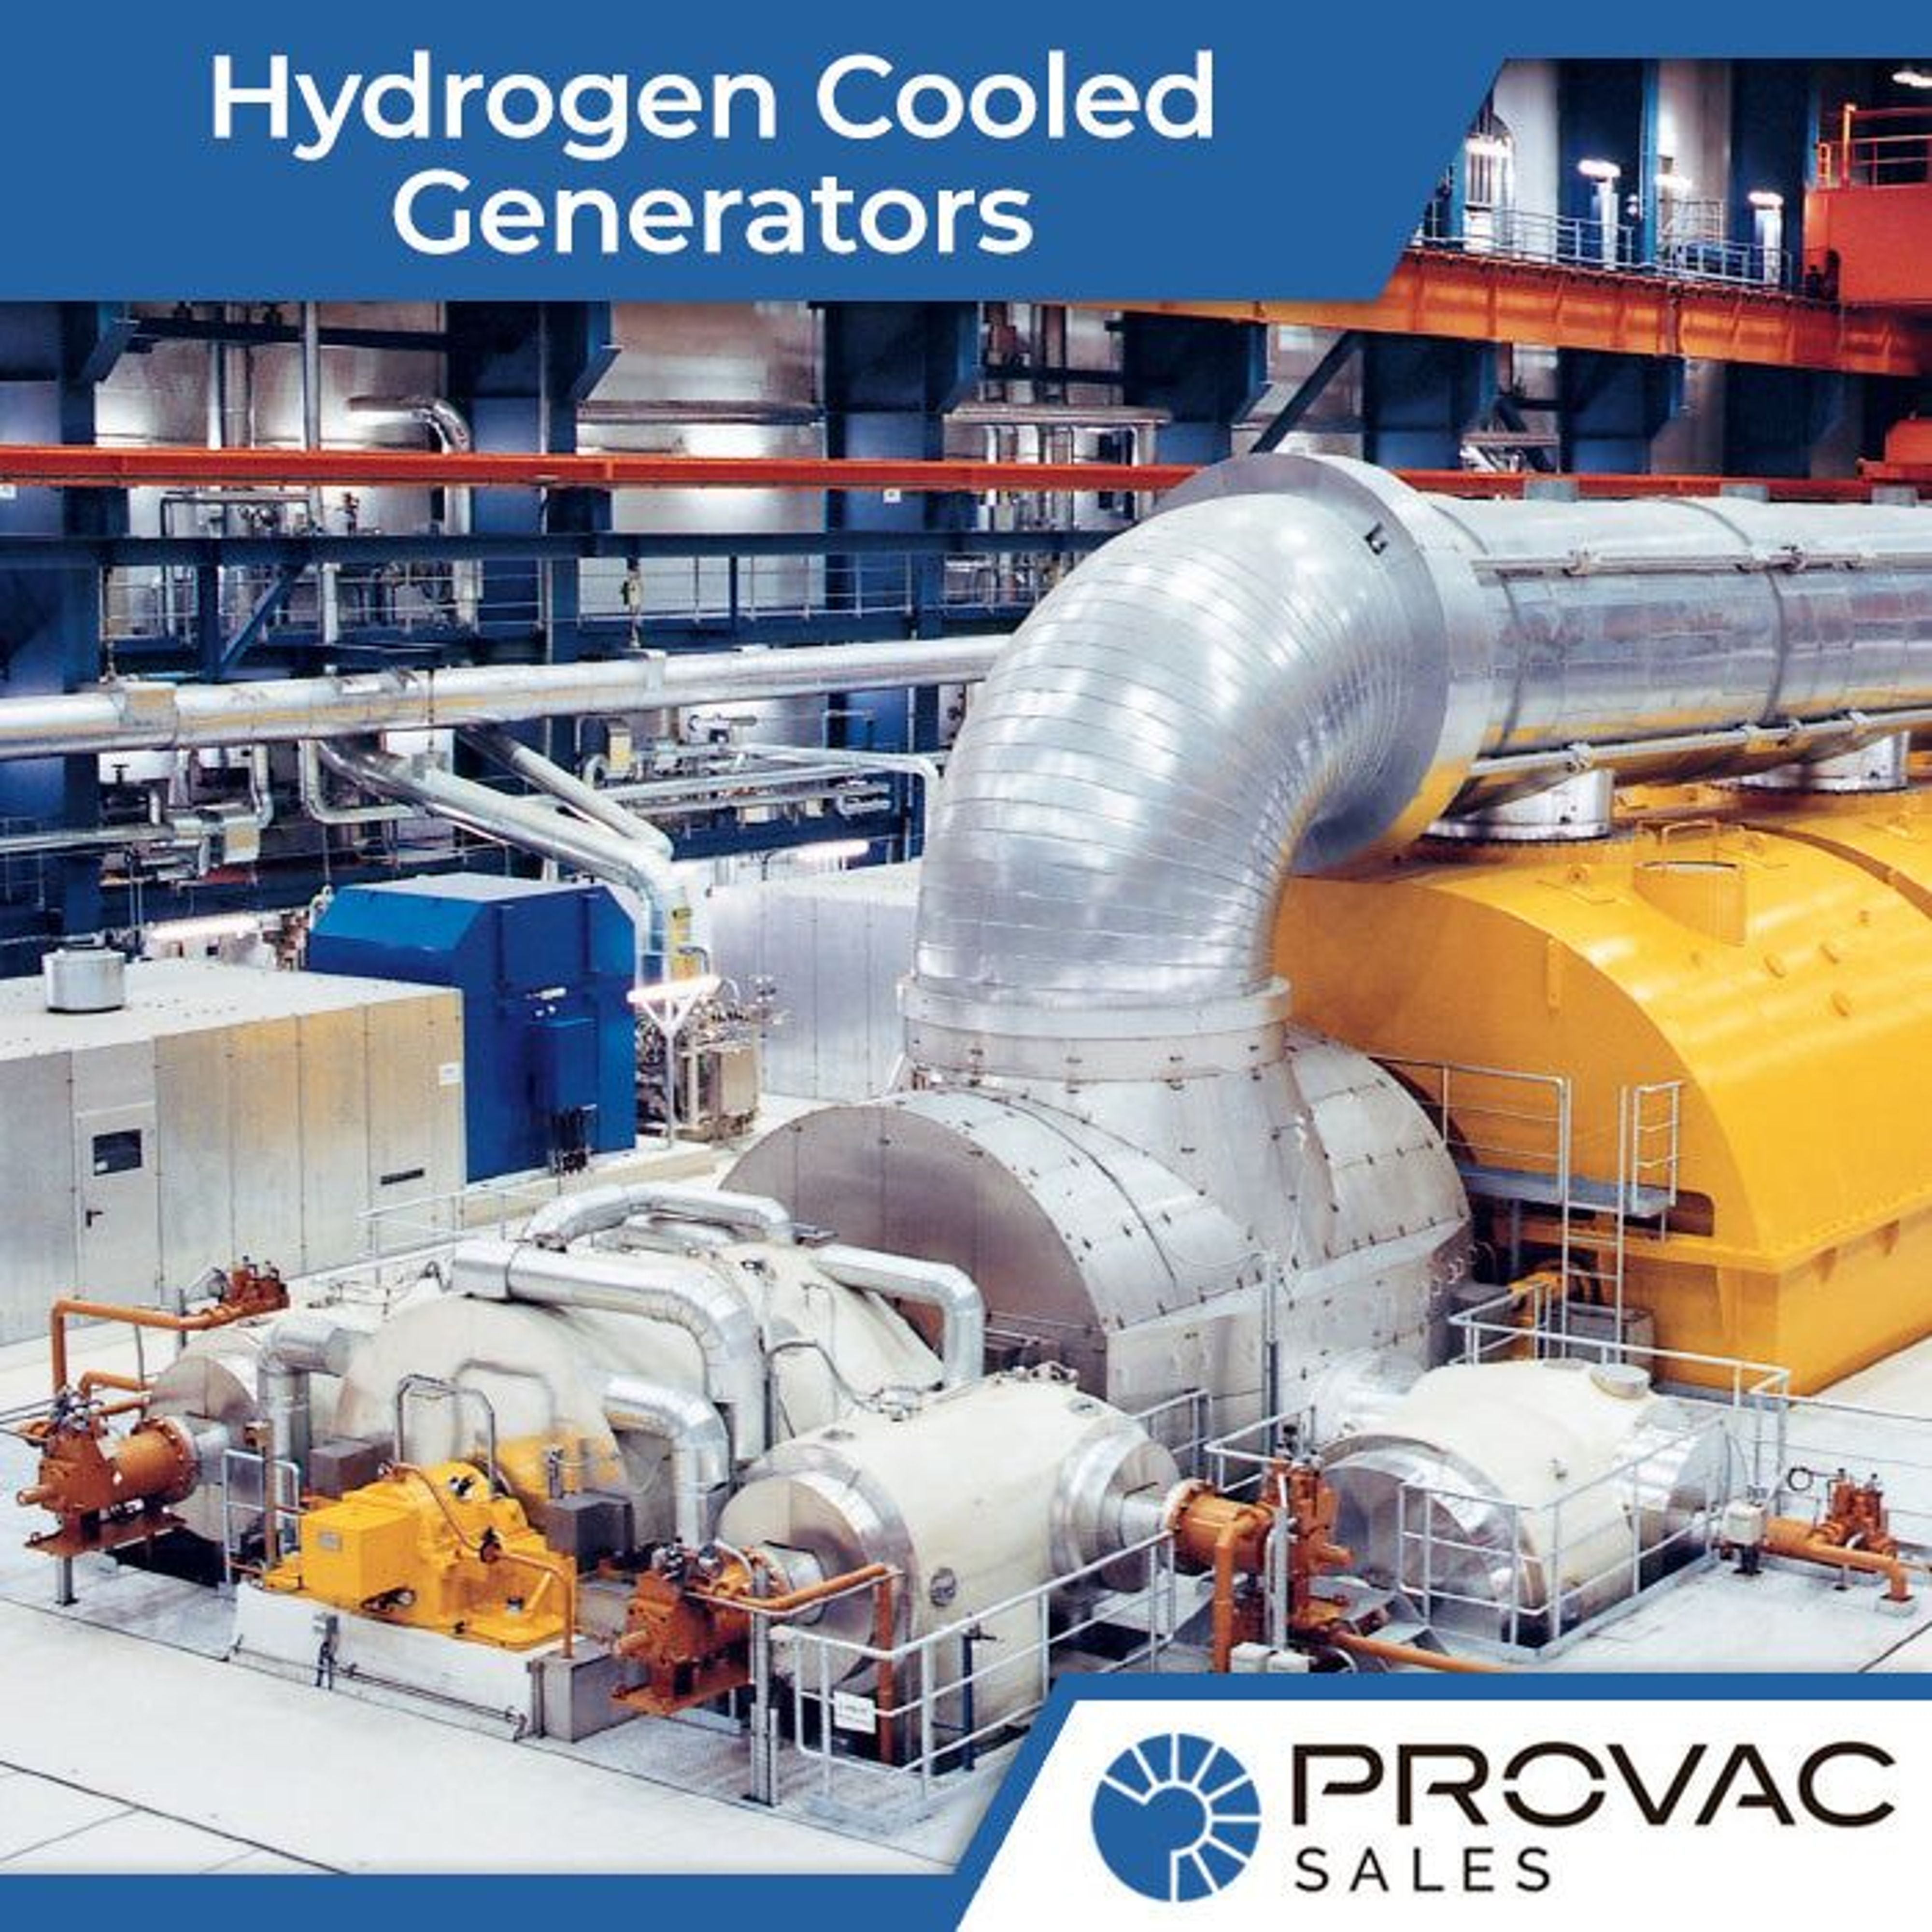 The Role of Vacuum Pumps in Hydrogen Cooled Generators Background